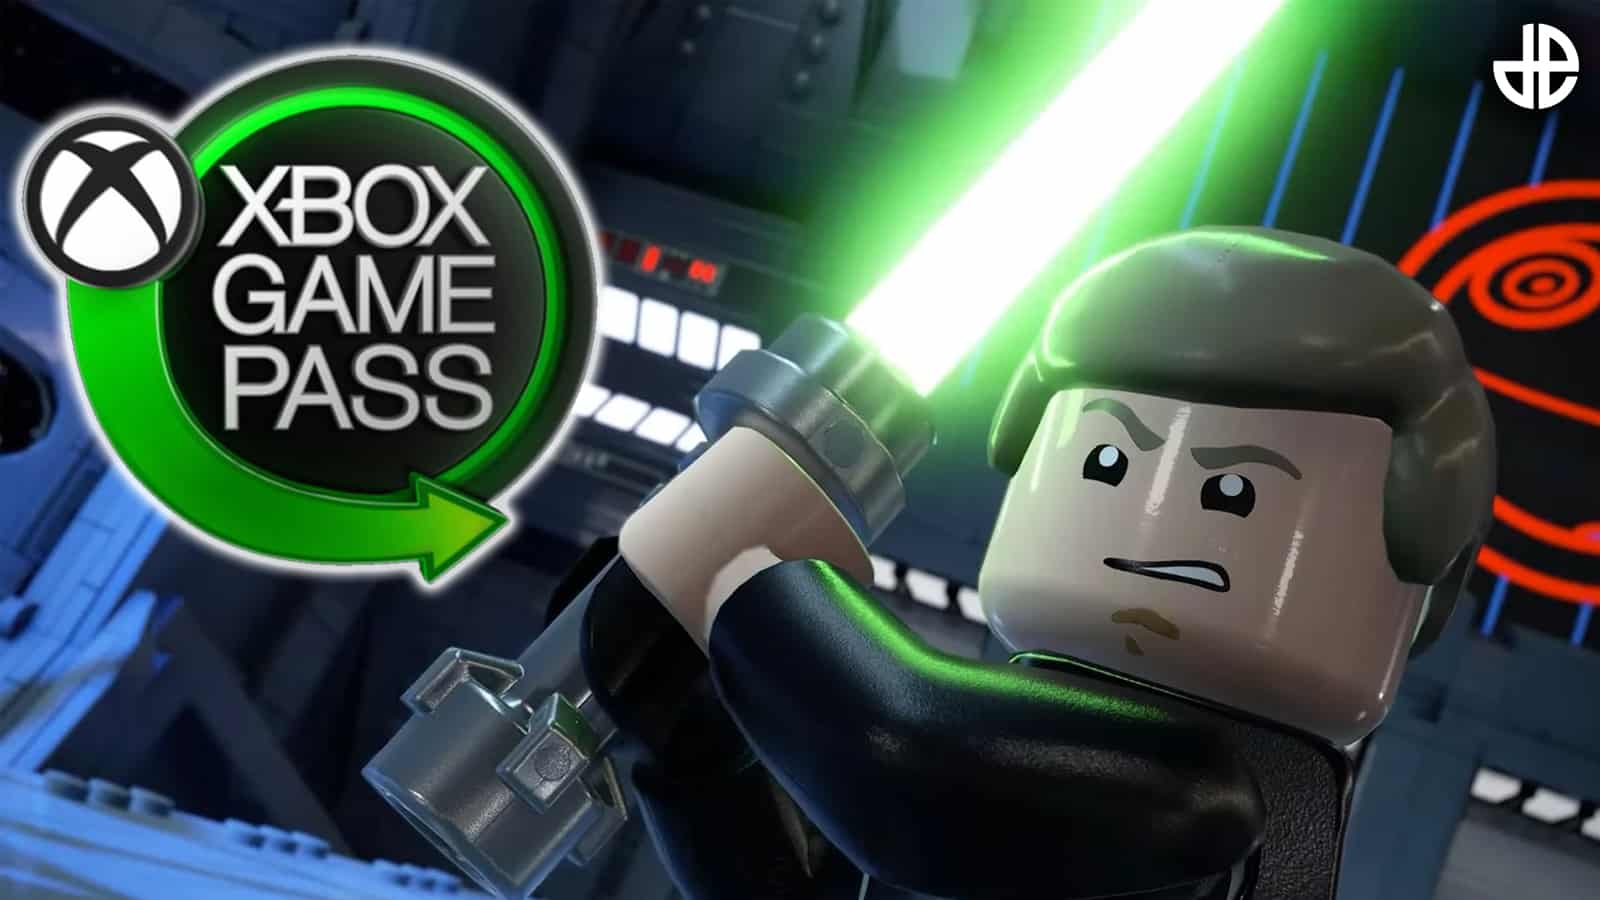 an image of lego star wars skywalker saga and xbox game pass